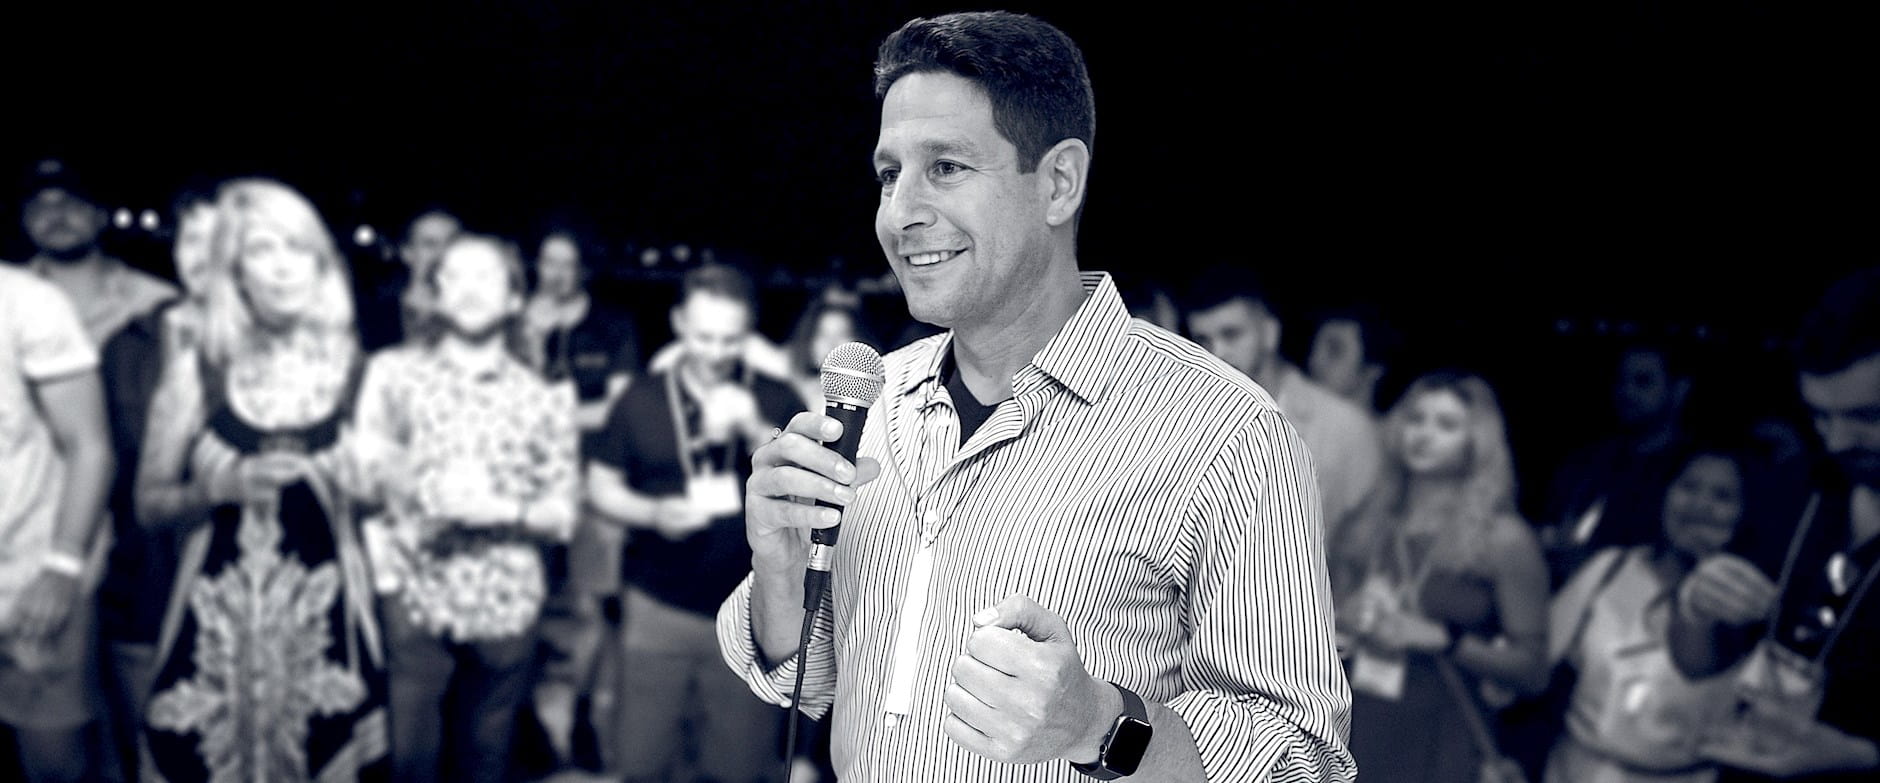 Grayscale image of Shai Terem speaking during a celebration